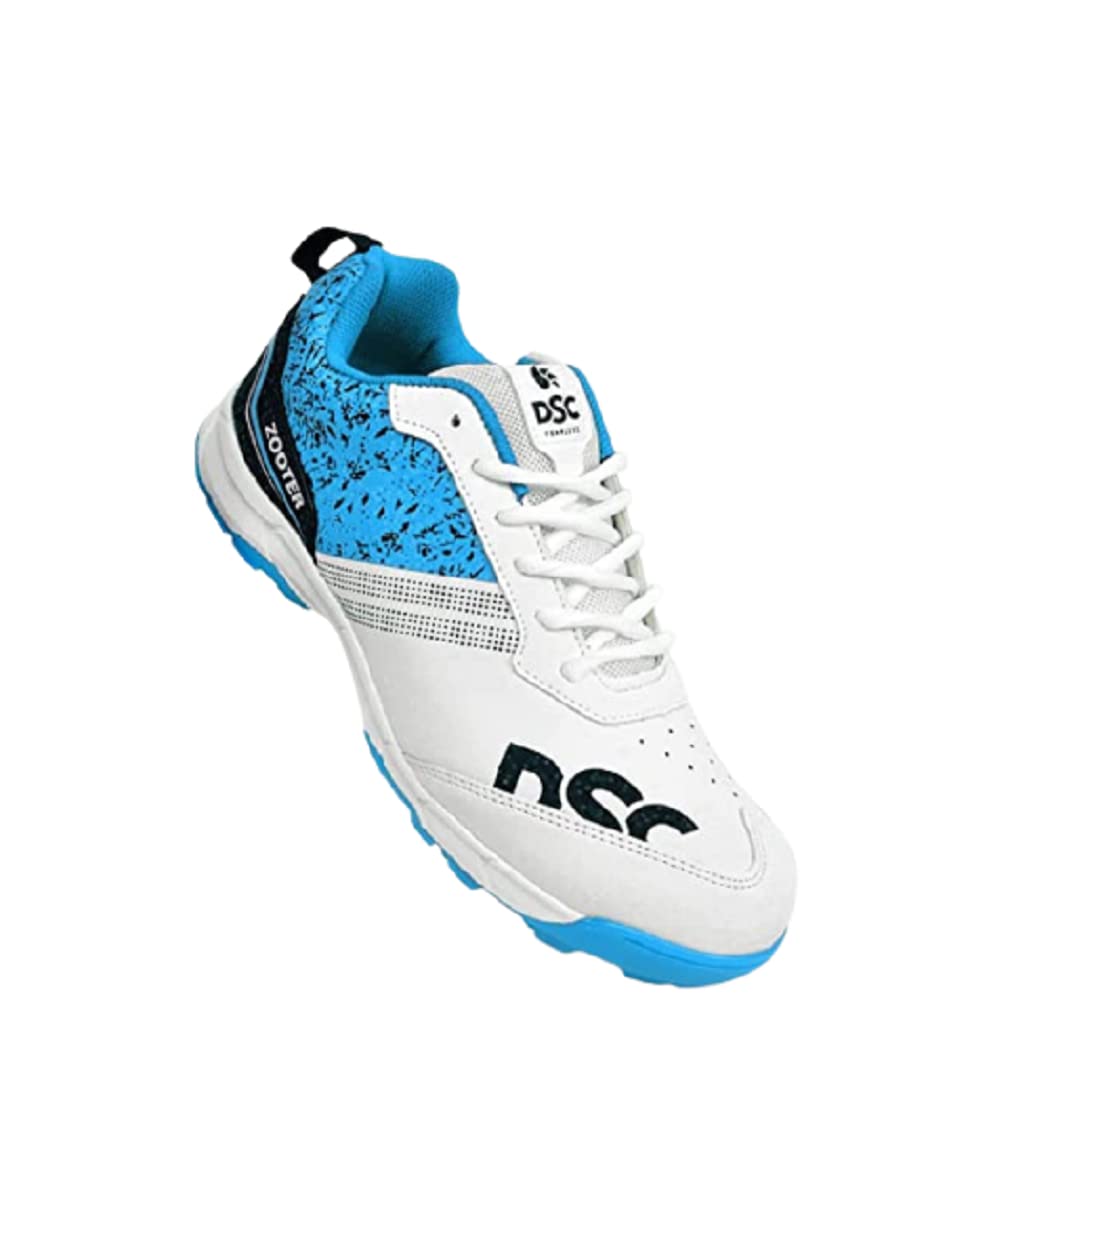 DSC boys Zoooter Cricket Shoes Cricket Shoes